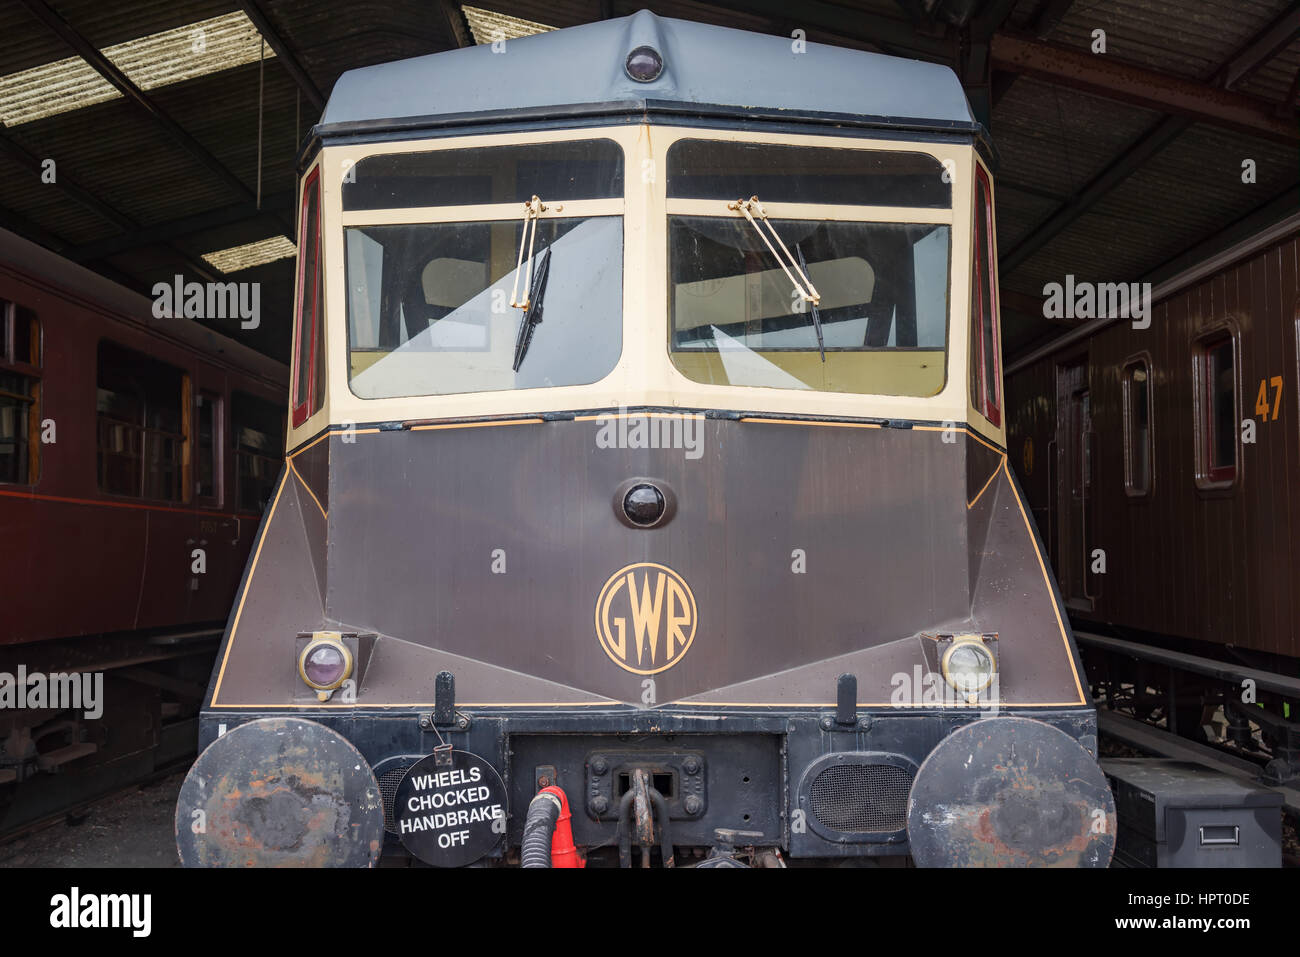 GWR heritage railcar at Didcot railway centre Stock Photo